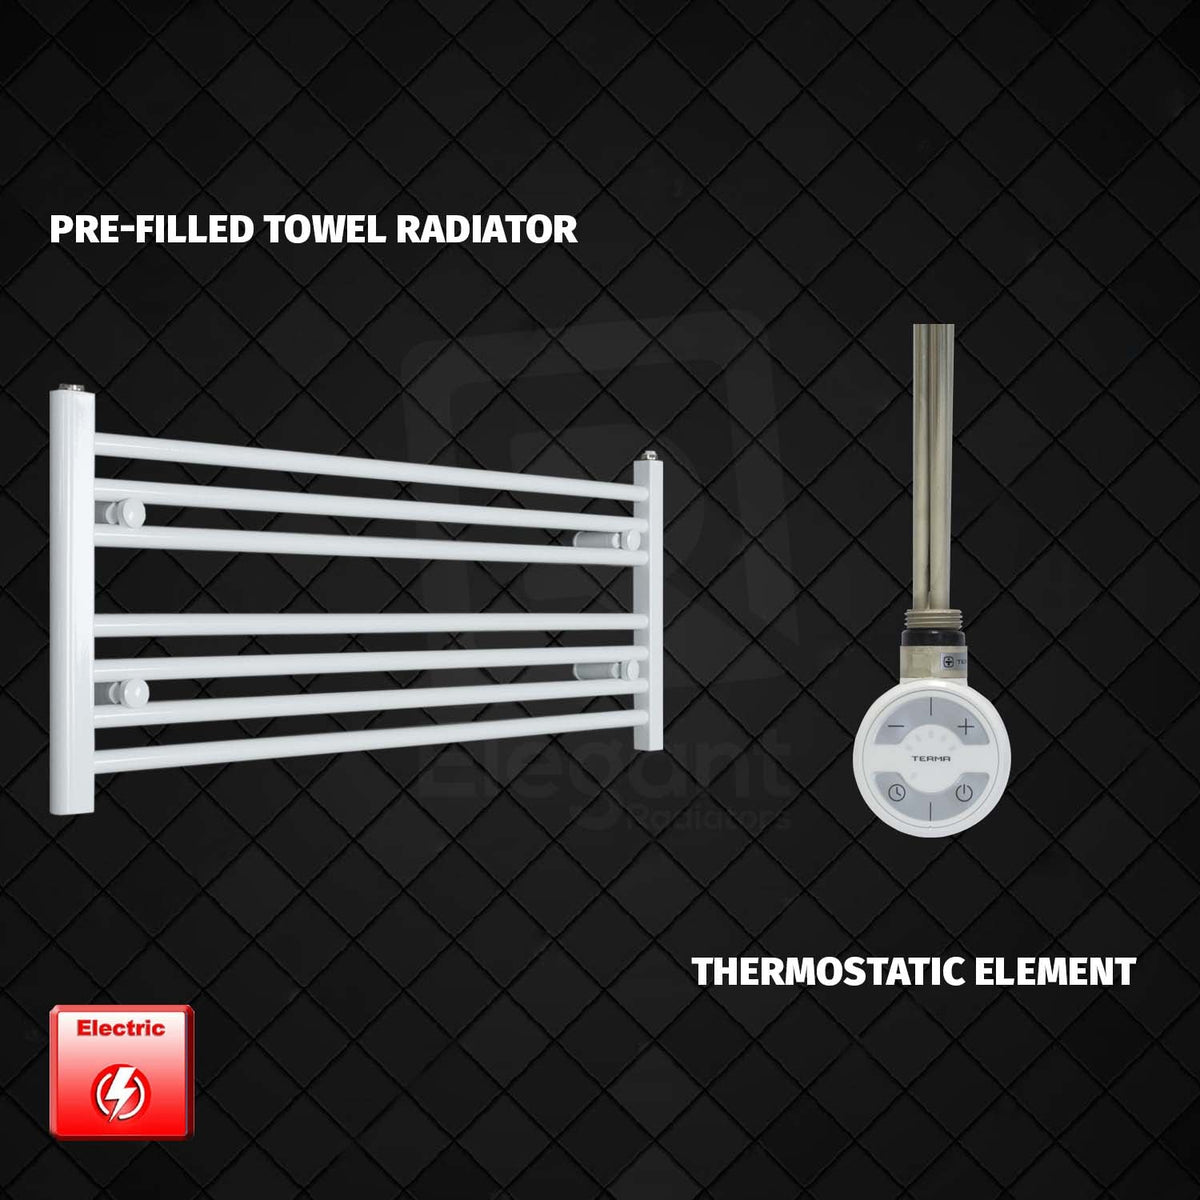 400mm High 1000mm Wide Pre-Filled Electric Heated Towel Radiator White HTR MOA Thermostatic element no timer